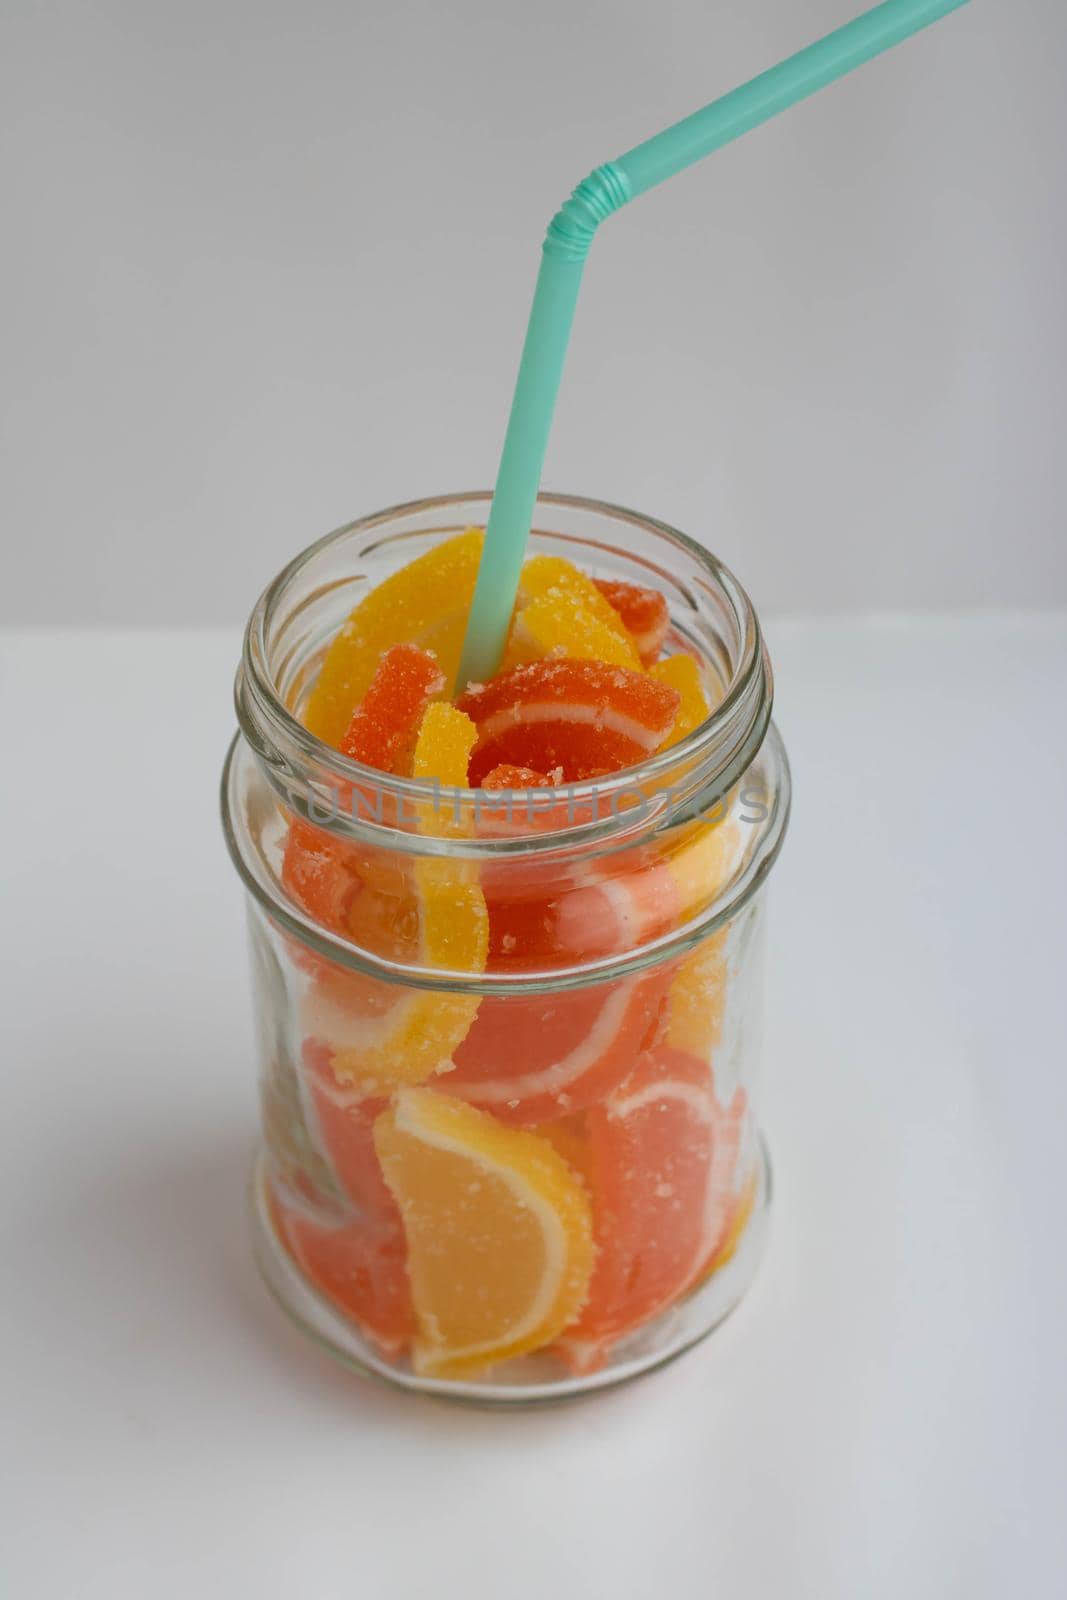 Dessert marmalade in the form of slices of lemon and orange in a jar. Sweet yellow and orange jelly candies